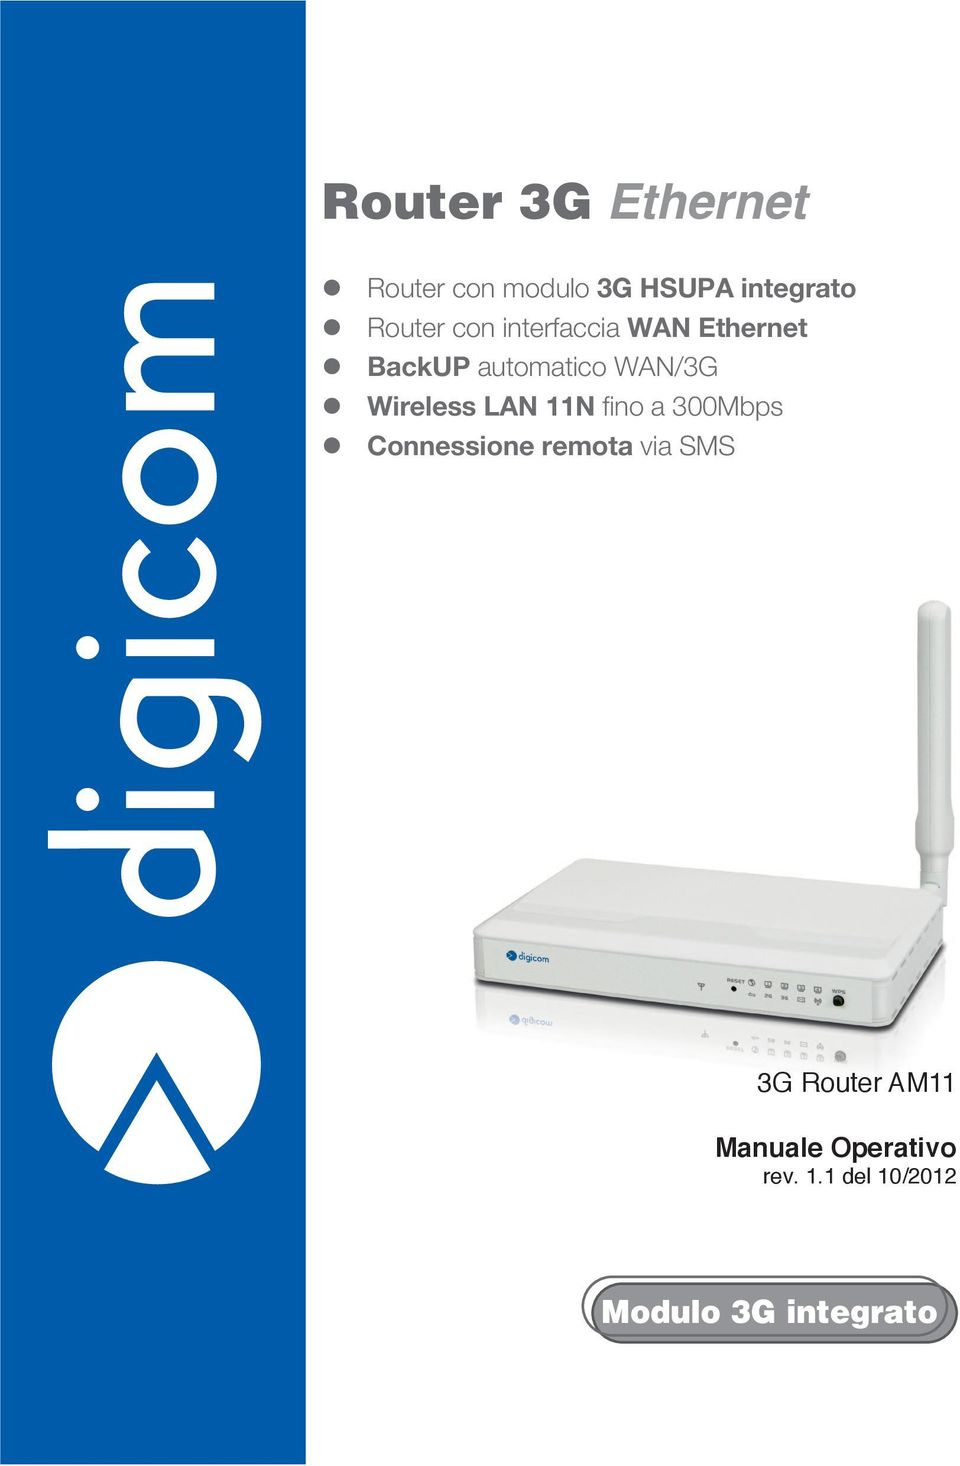 LAN 11N fino a 300Mbps Connessione remota via SMS 3G Router